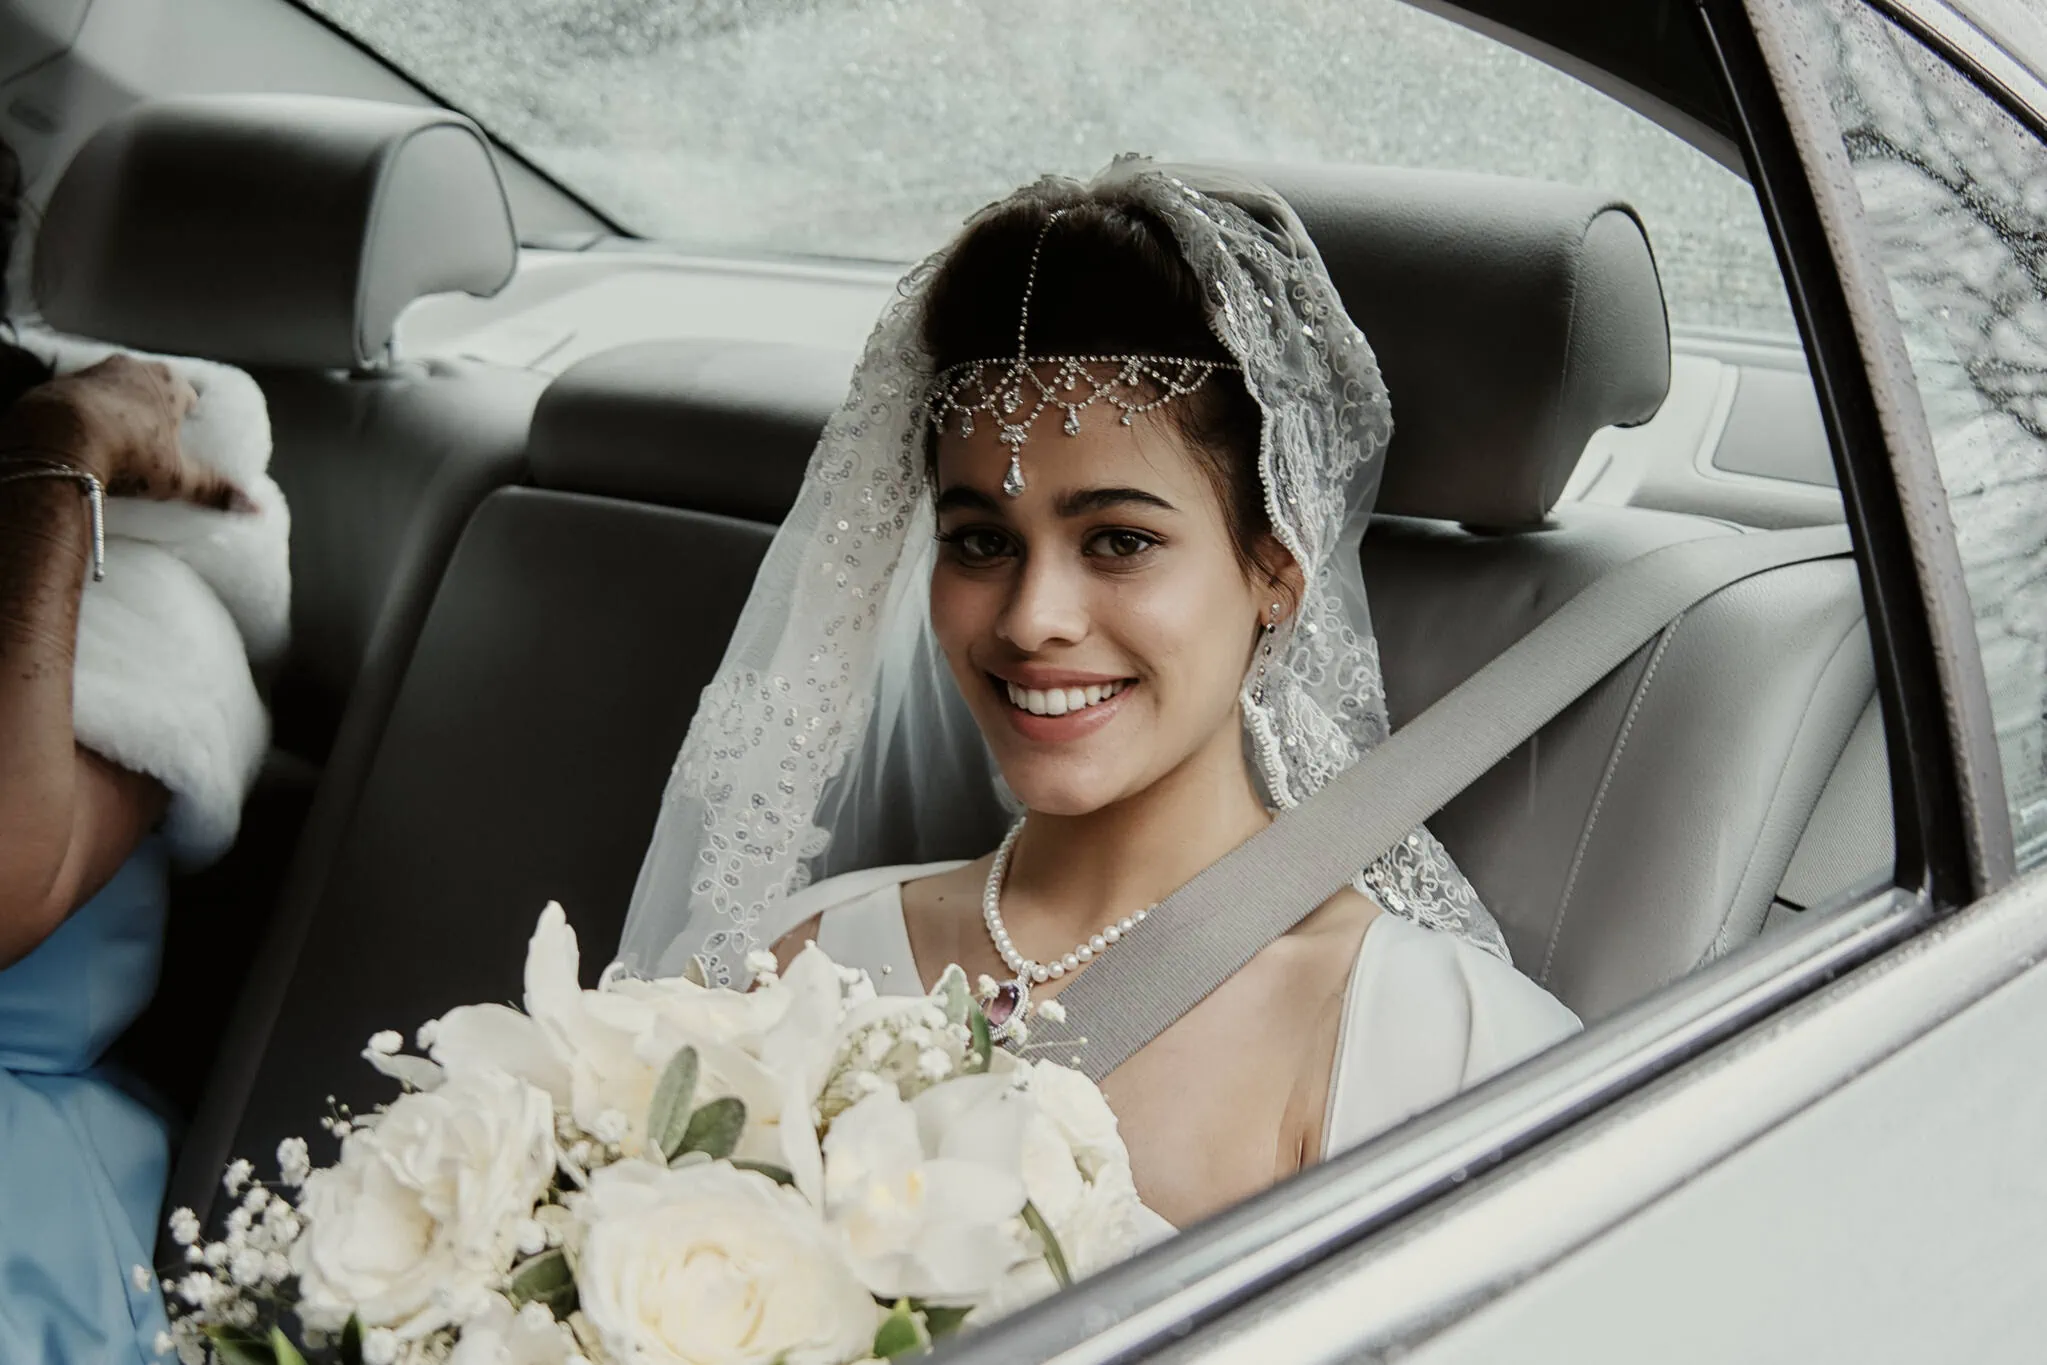 Queenstown New Zealand Elopement Wedding Photographer - Queenstown Islamic Wedding: A bride, Yumn, sitting in the back seat of a car.